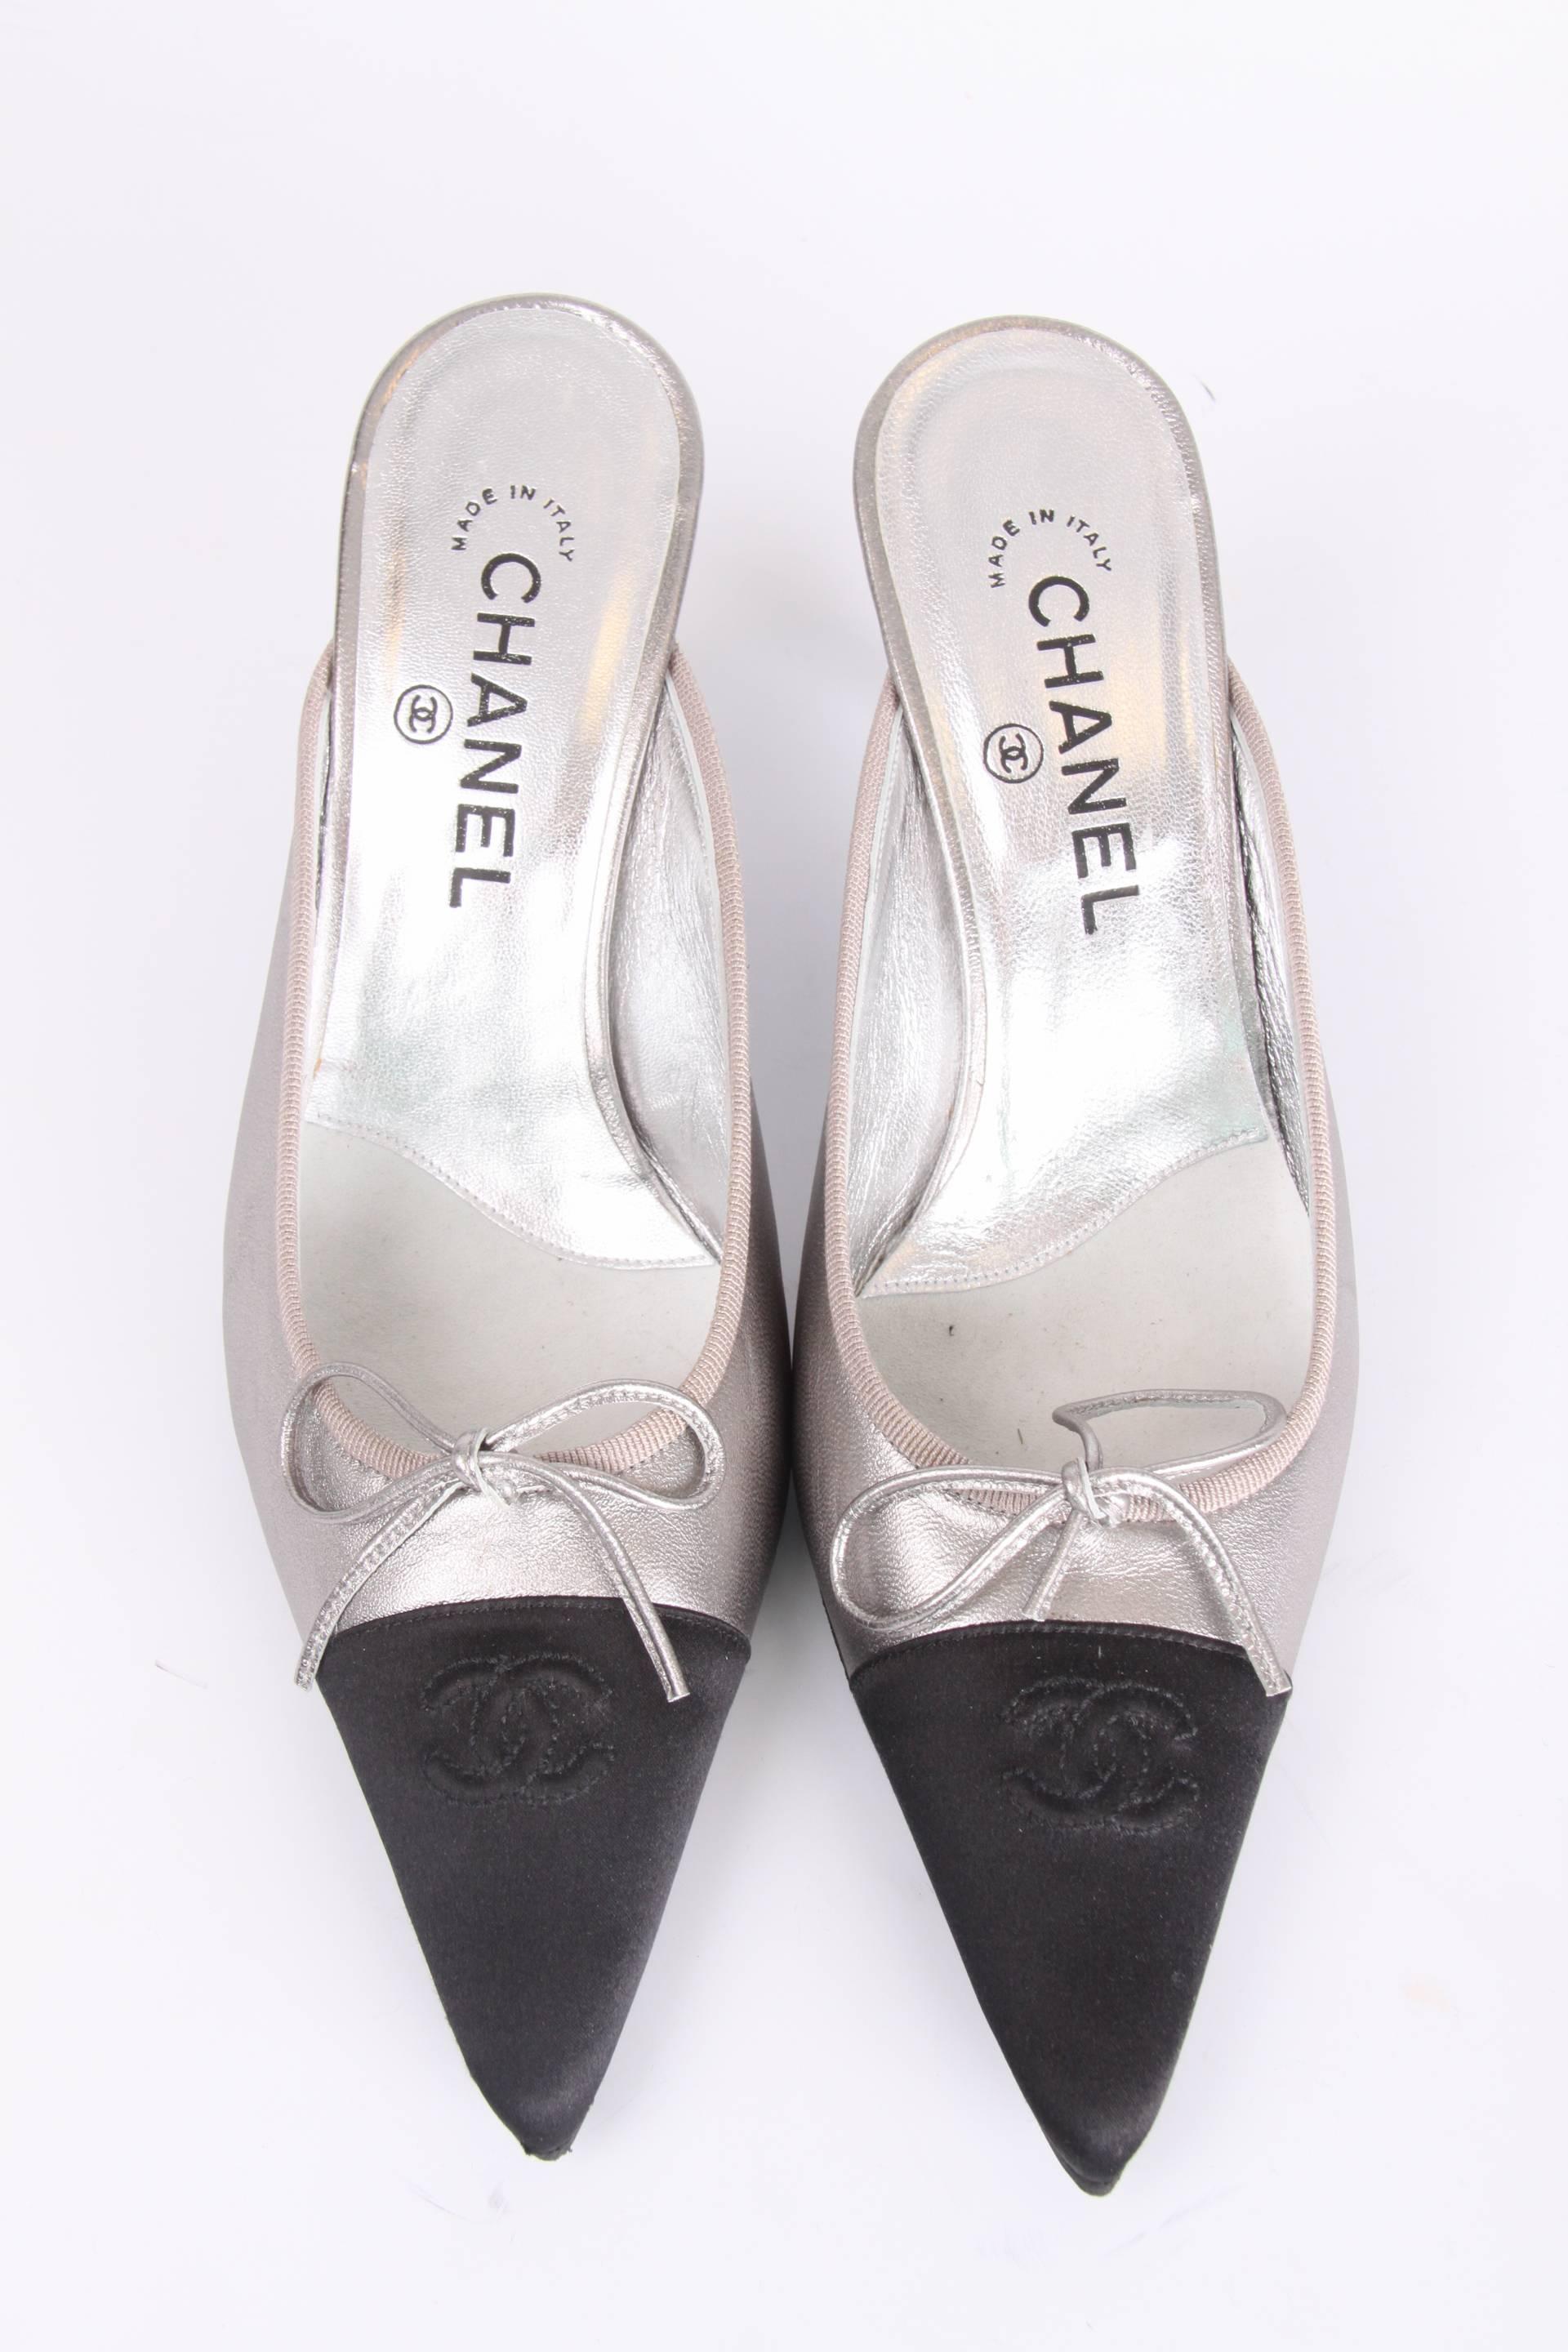 Chanel Shoes - silver leather/black satin  In New Condition For Sale In Baarn, NL